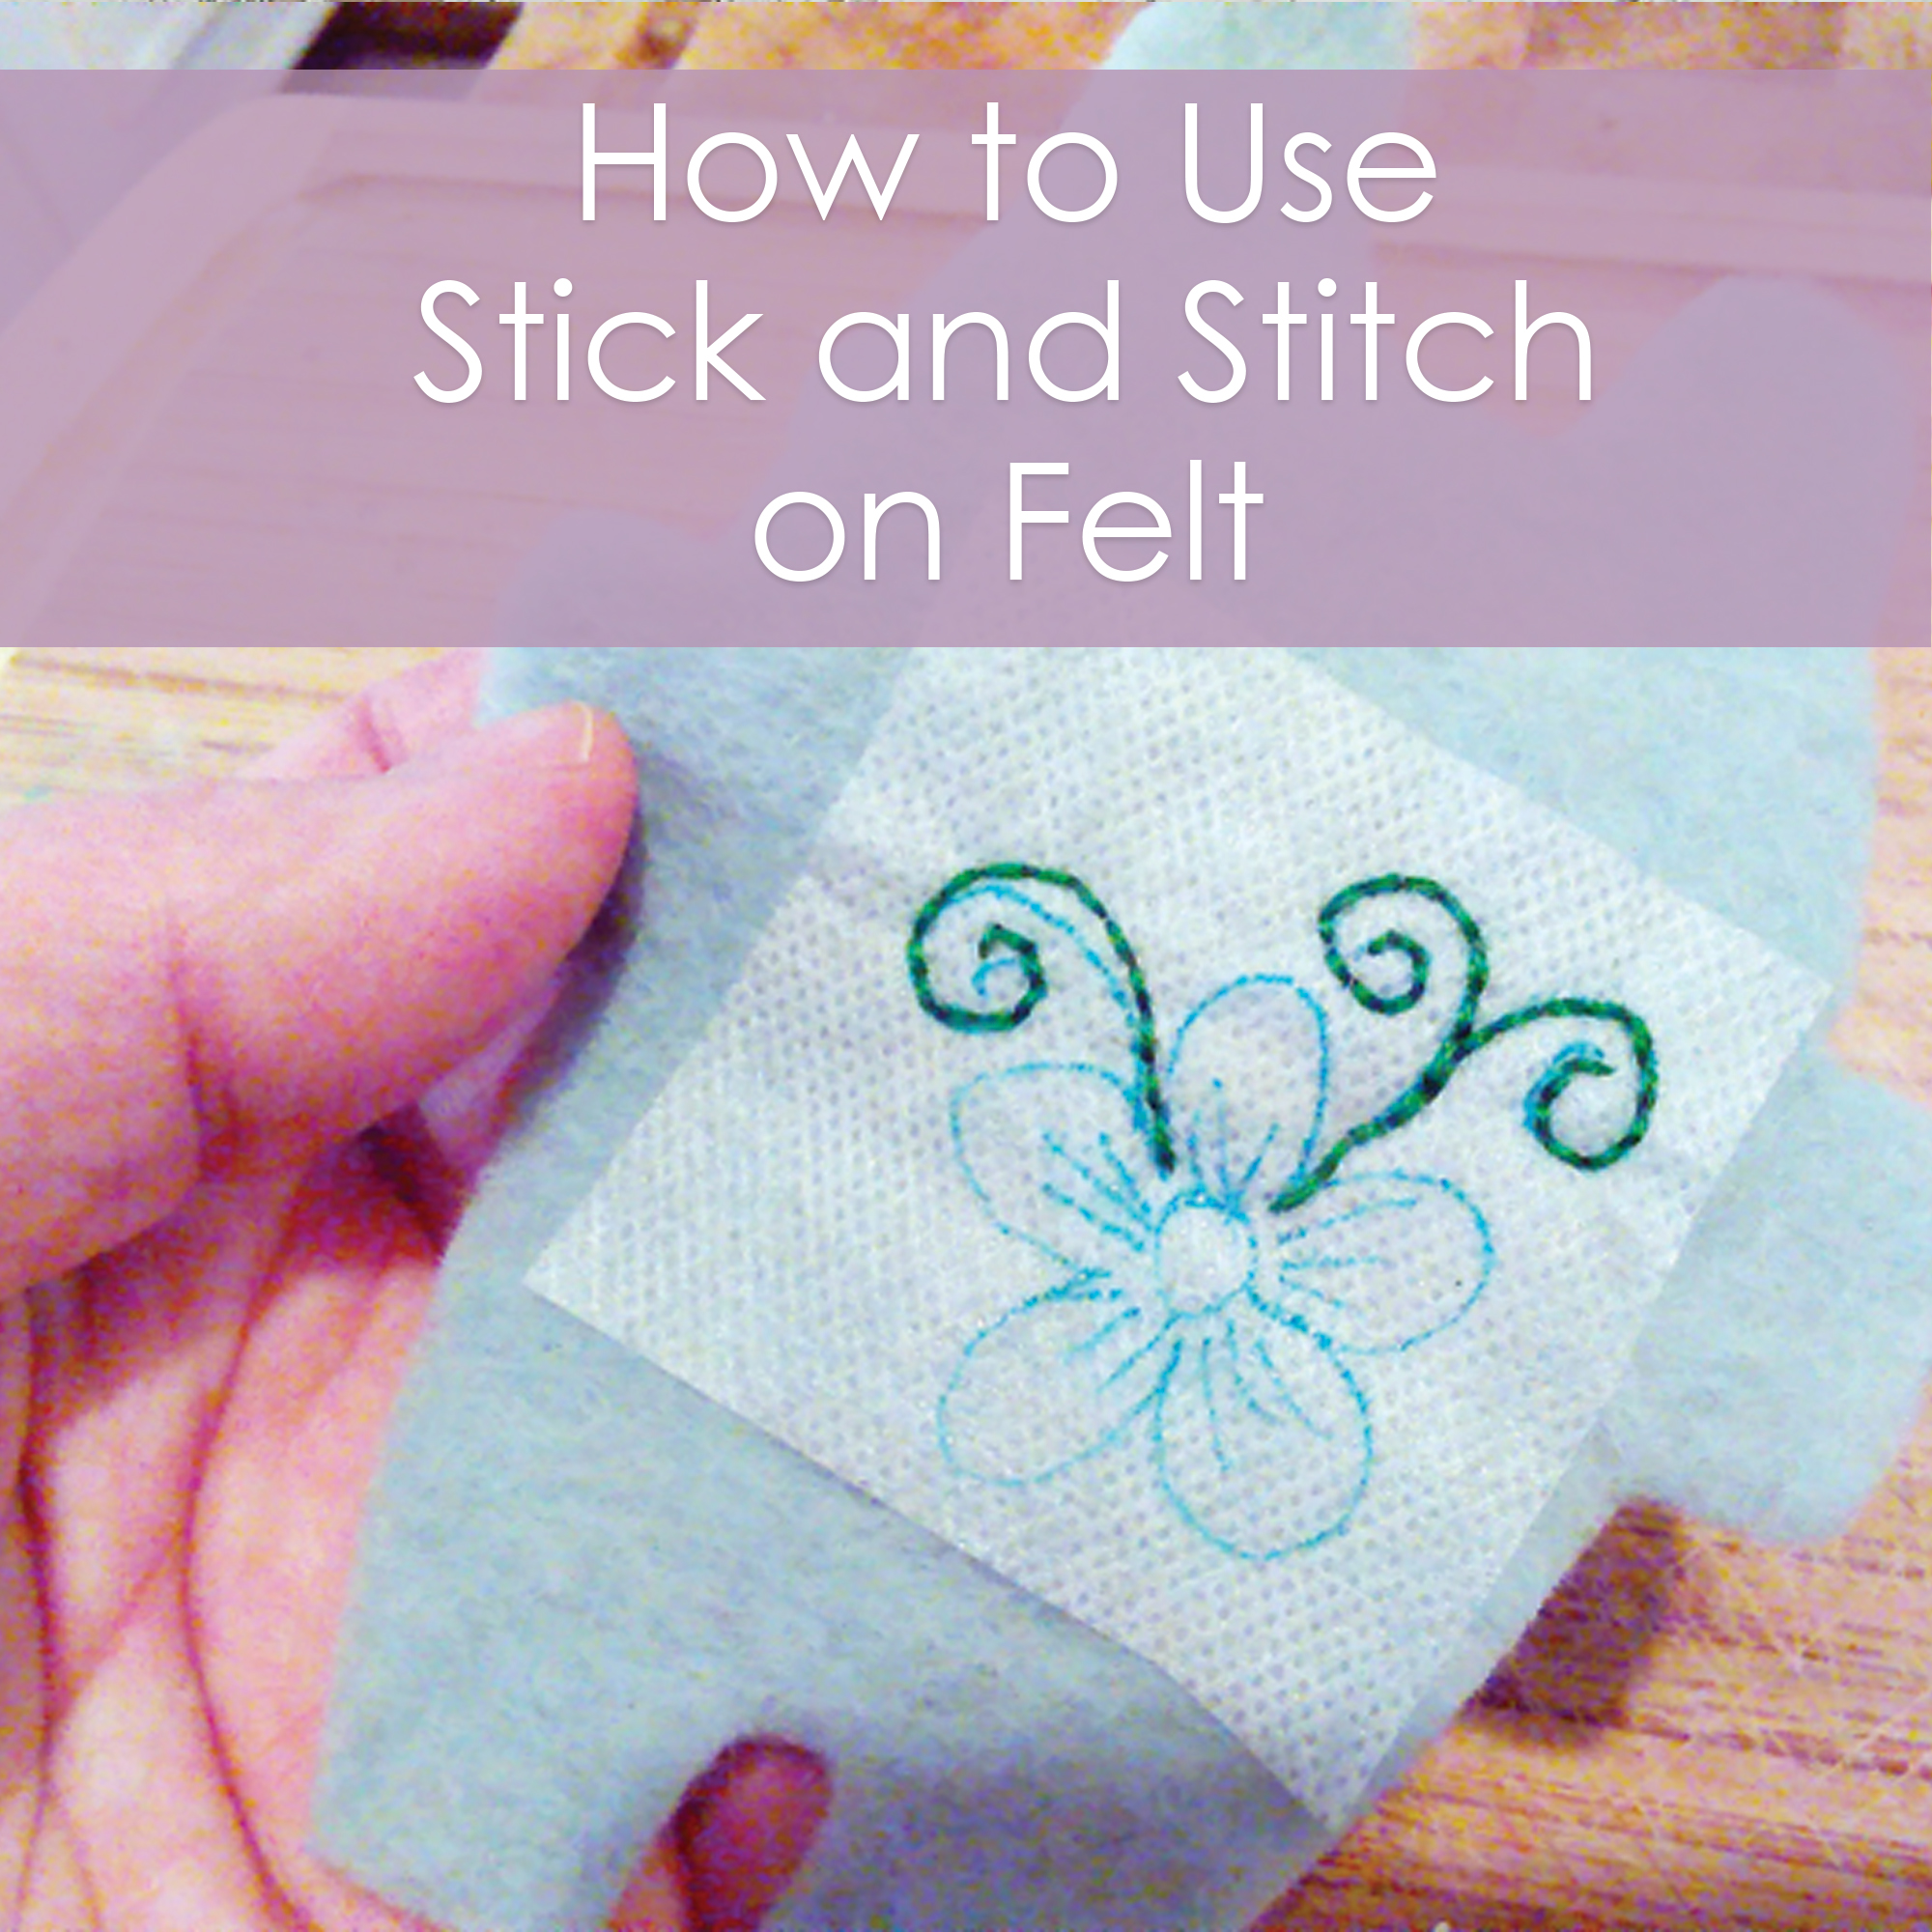 Use Sulky Fabri-Solvy for Transferring Embroidery Patterns – Muse of the  Morning – Hand Dyed Embroidery Floss & Fabric + PDF Embroidery Patterns